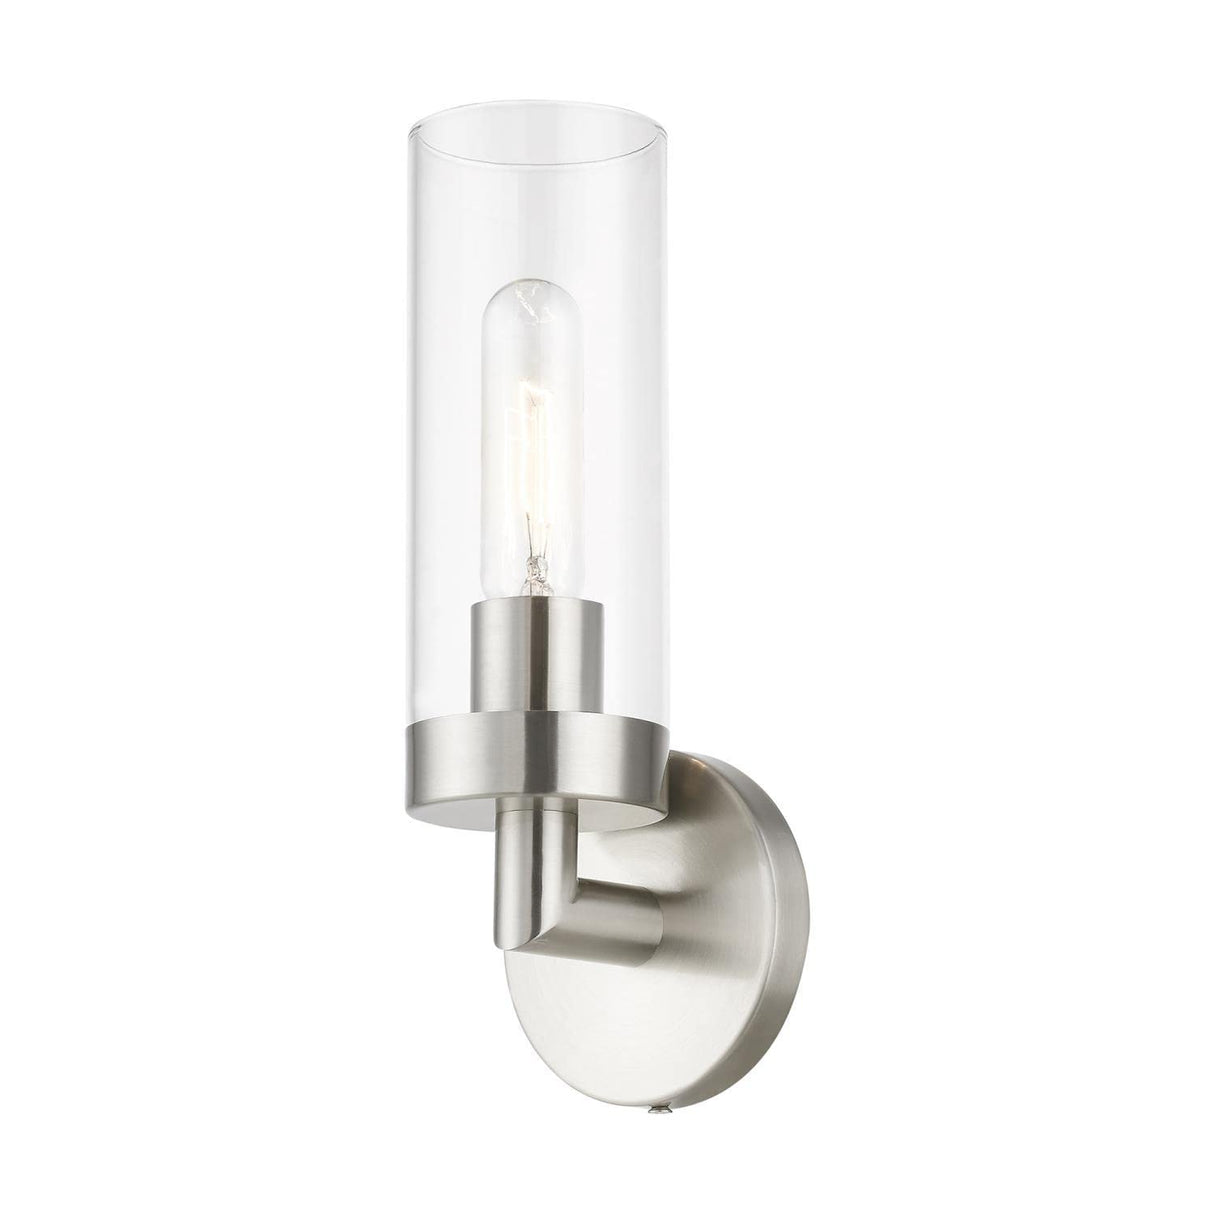 Ludlow 1 Light Sconce in Brushed Nickel (16171-91)